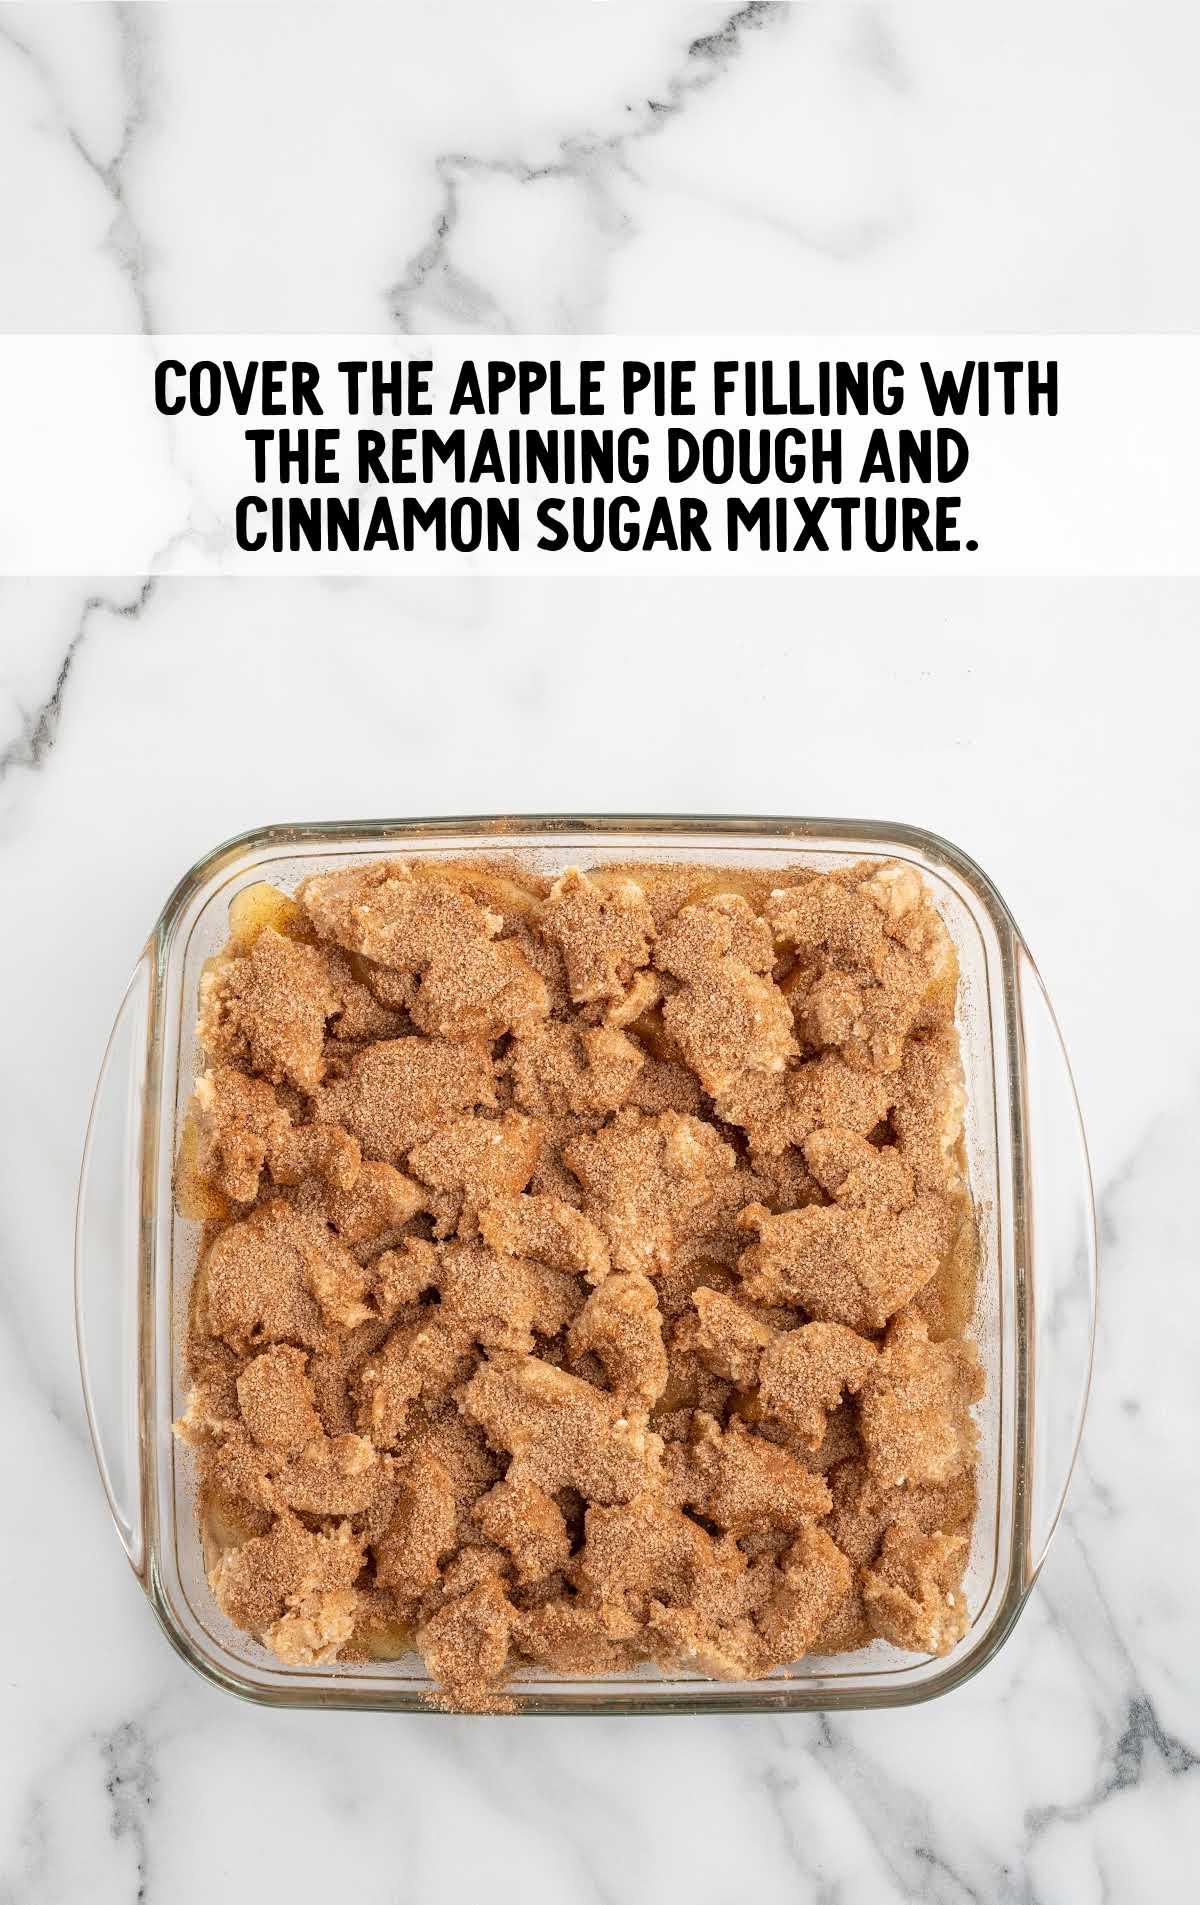 apple filling cover with the remaining dough and cinnamon sugar mixture